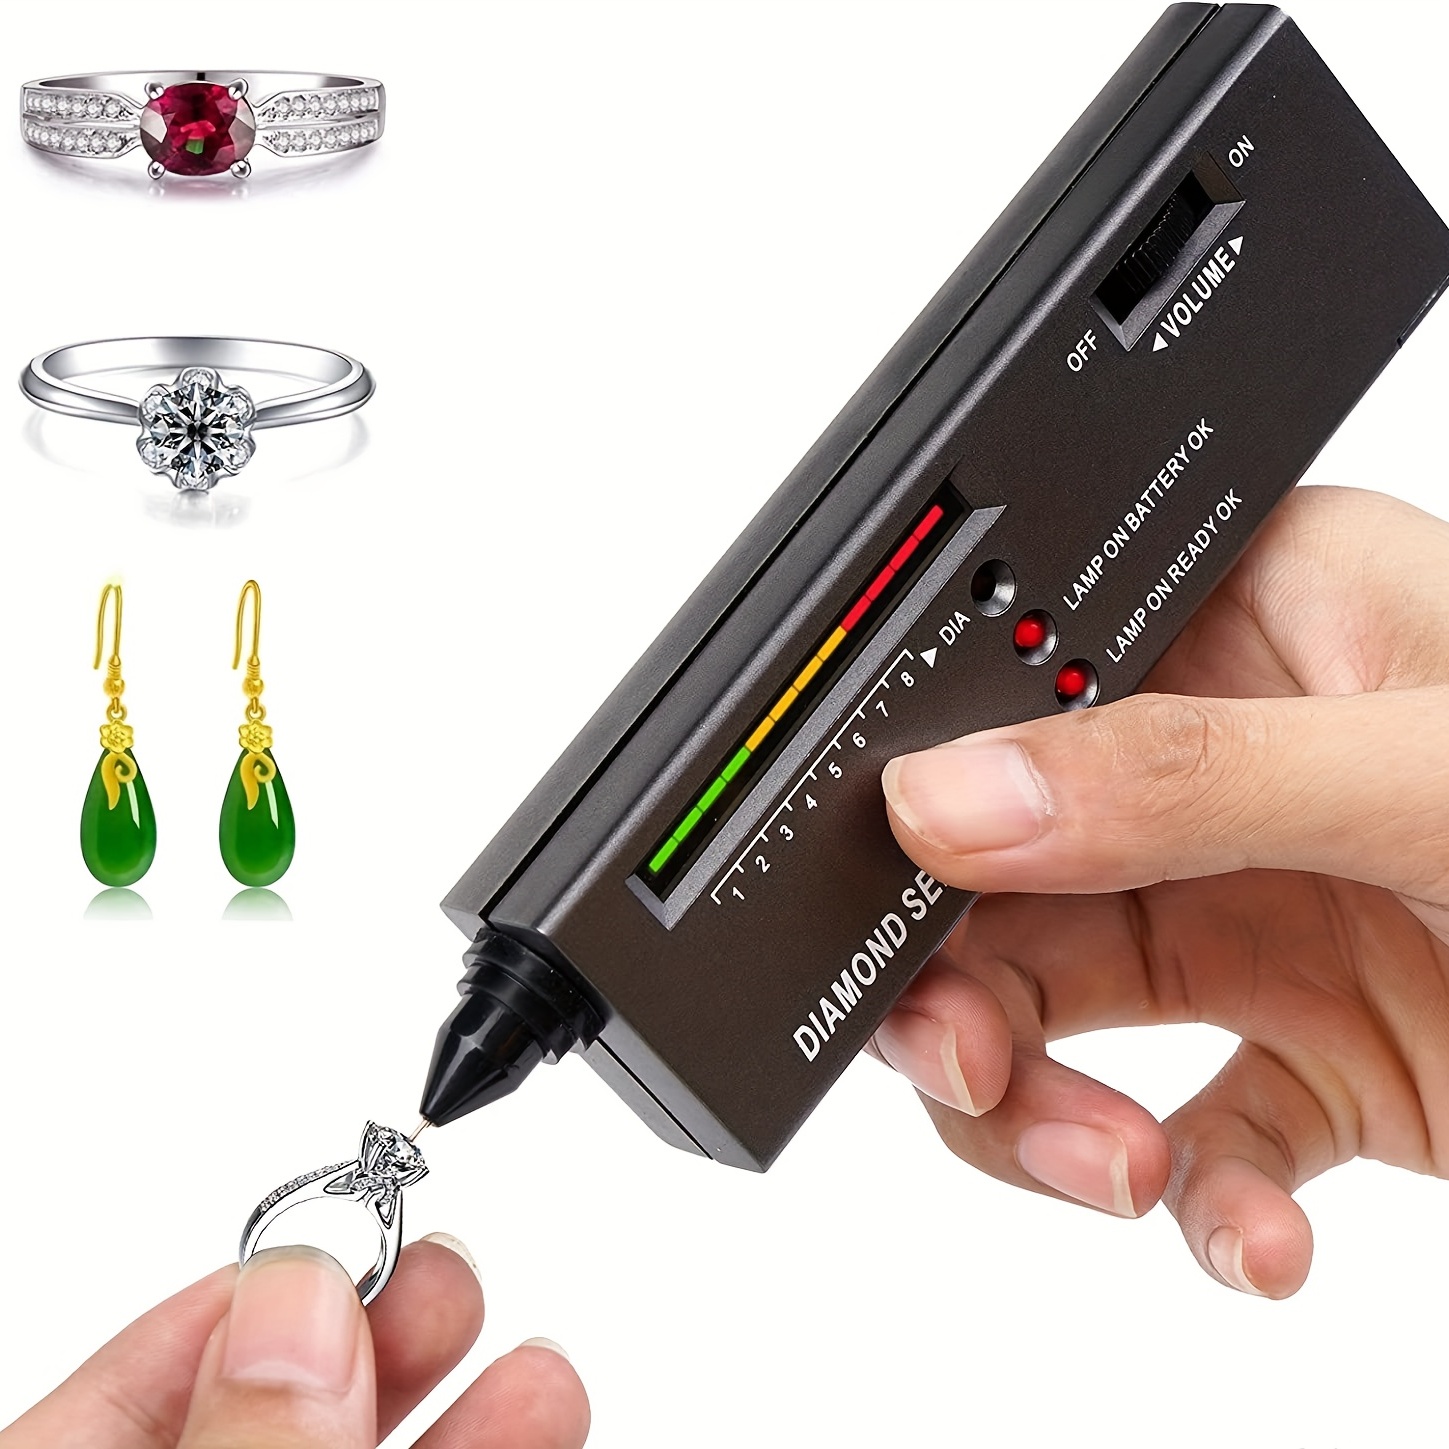 Diamond Tester Pen, High Accuracy Jewelry Diamond Tester+200g/0.01g Mini  Jewelry Scale+60X Mini LED Magnifying, Professional Diamond Selector for  Novice and Expert, Thermal Conductivity Meter Diamond  Tester+200g/0.01gDigital Gram Scale+60X Loupe